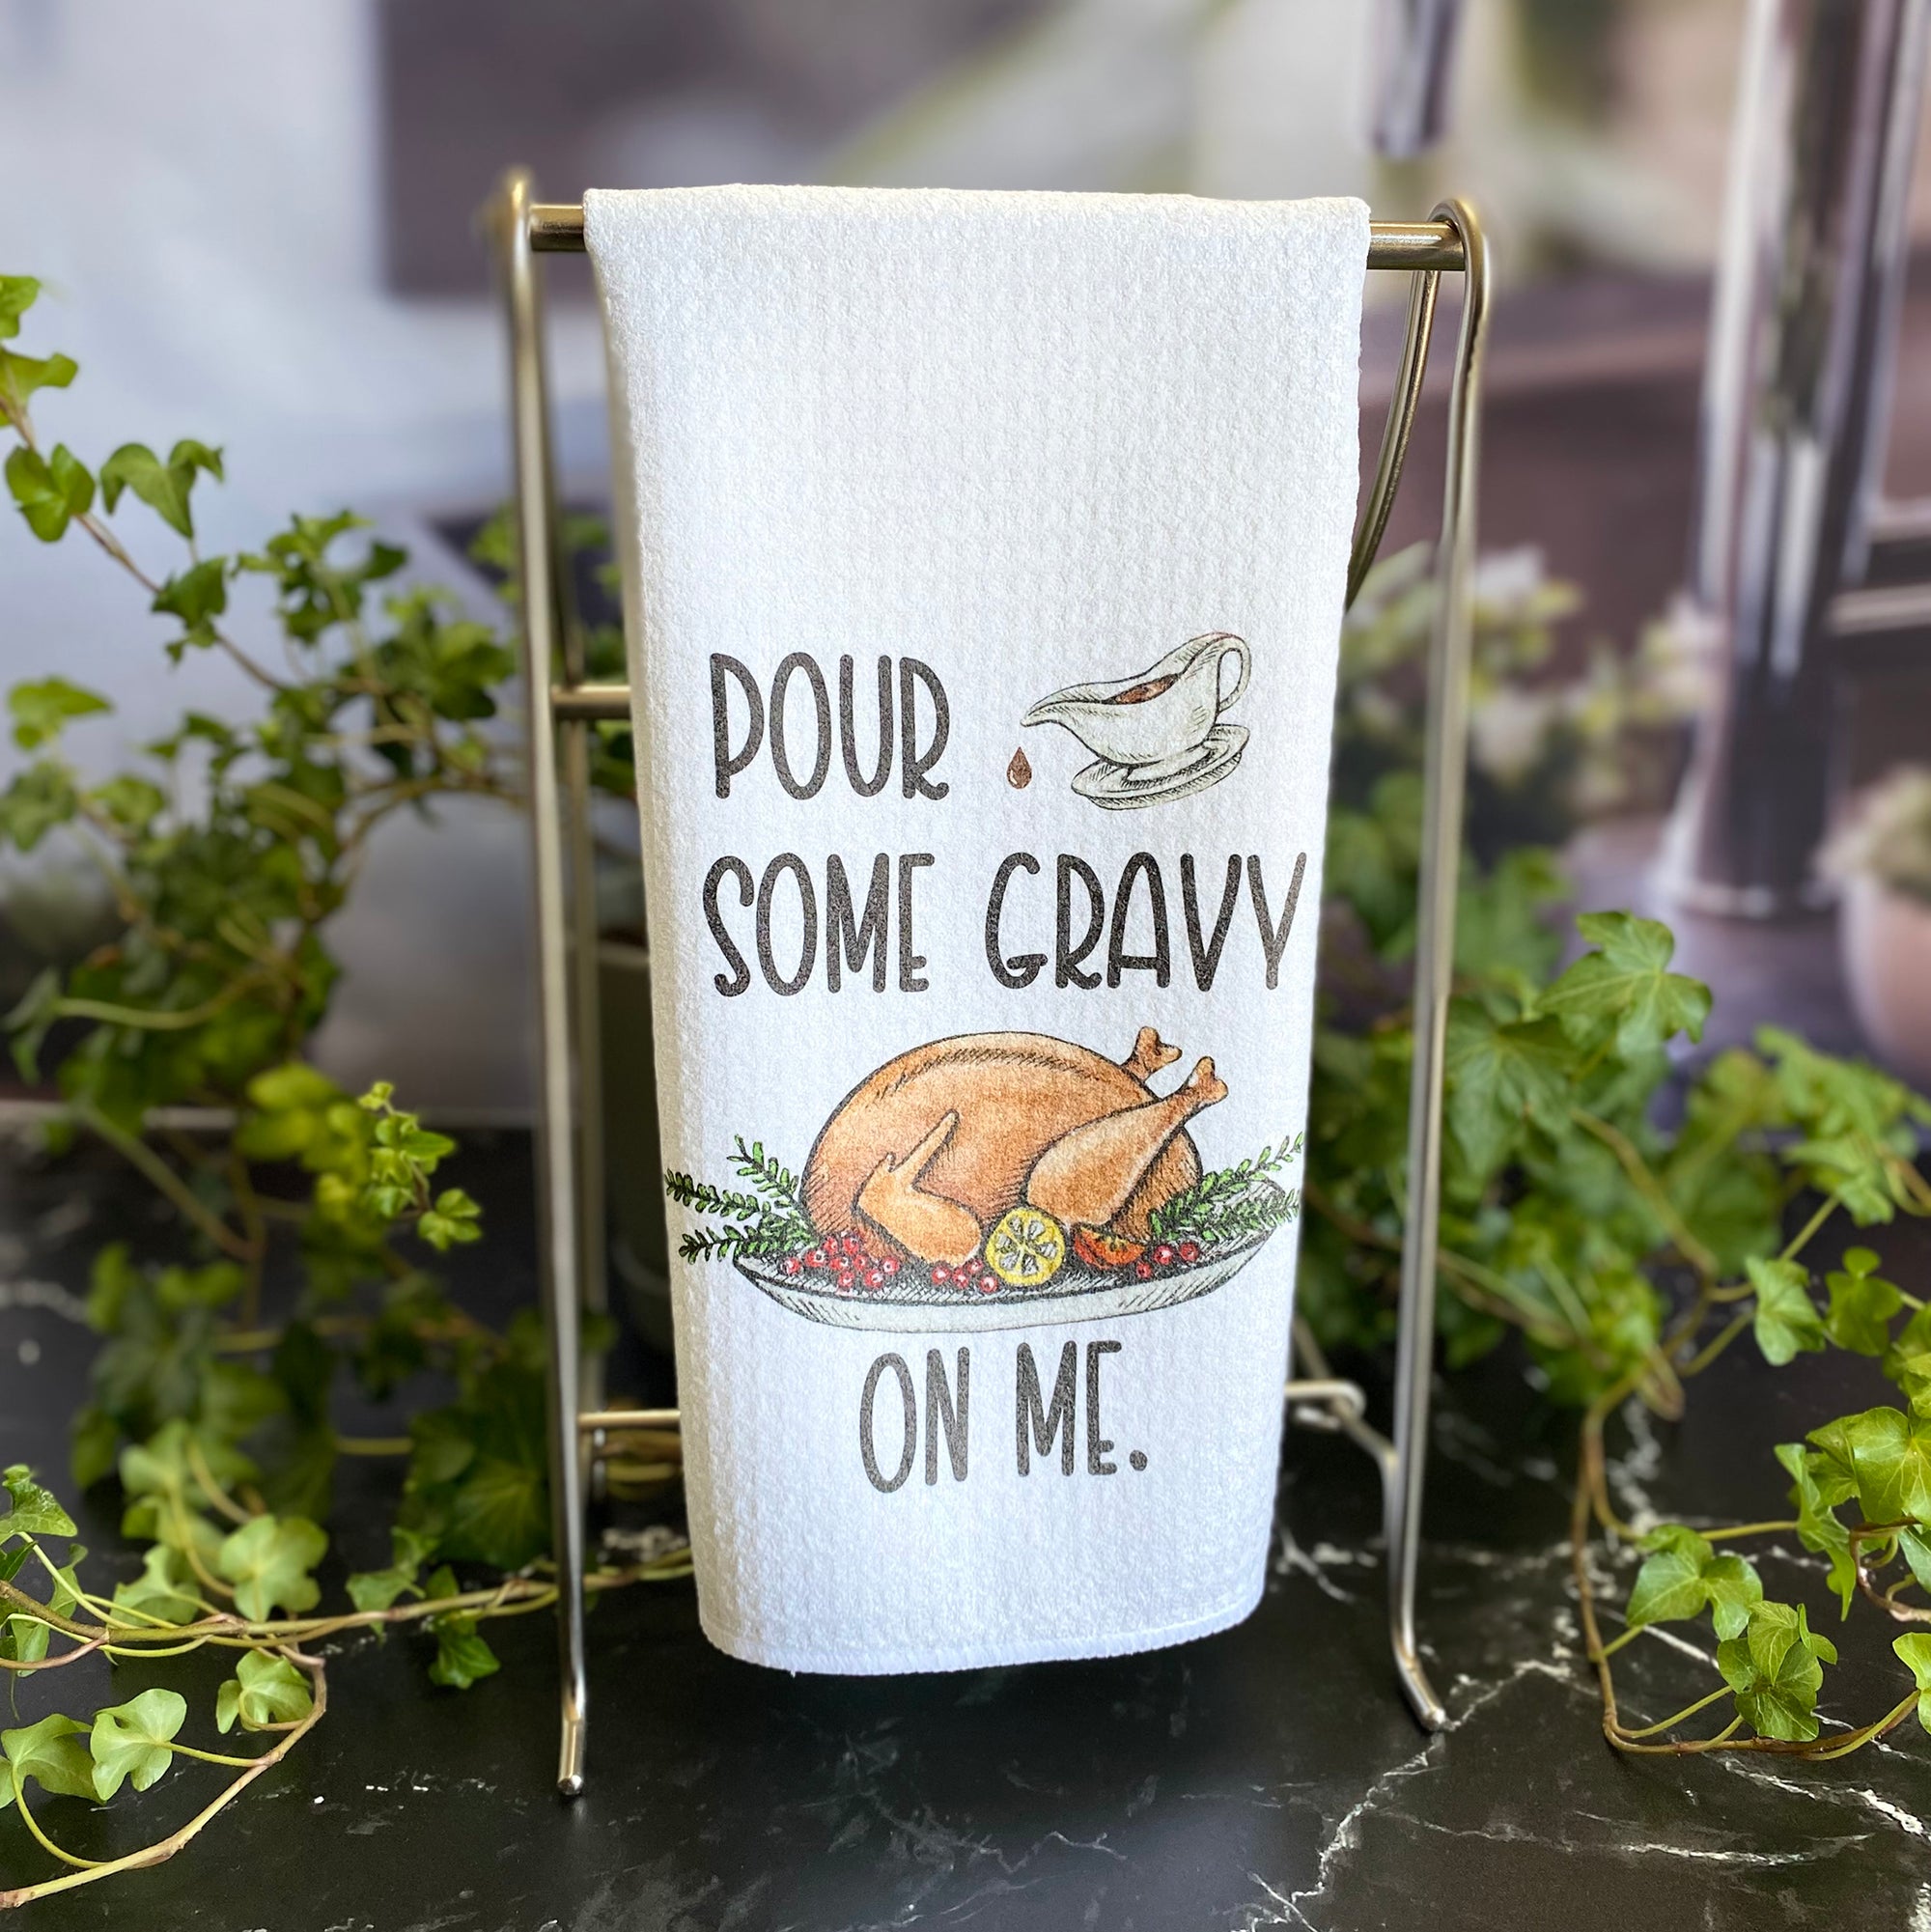 A white dishtowel  with a hand drawn image of a turkey on a platter with garnishes and a small gravy boat, pouring a drip of gravy onto the words, "Pour some gravy on me." in all caps